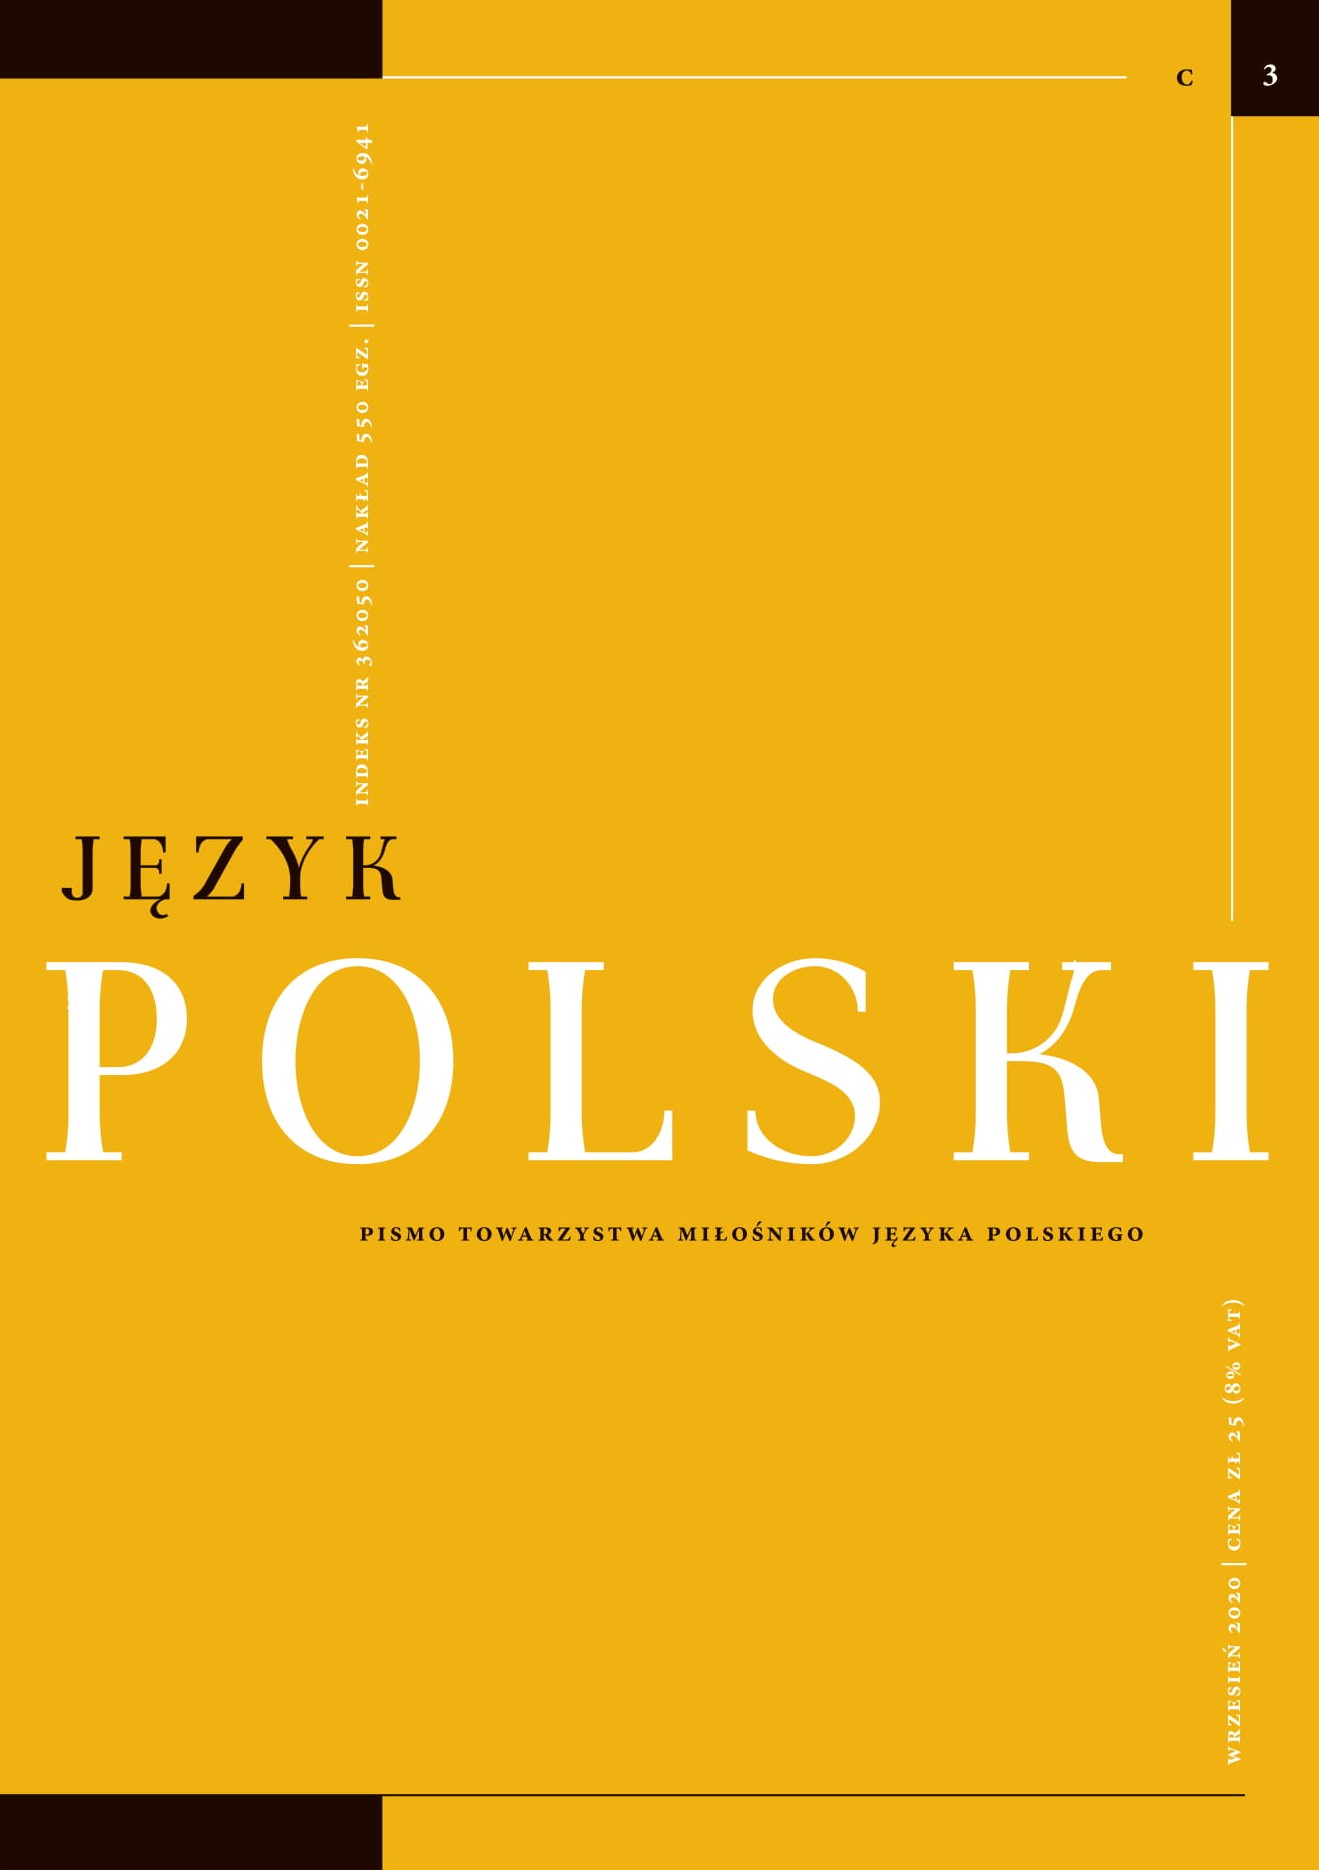 "Wychódźc", "Pcim" and "Rzgów". Consonant clusters in place names in the light of Polish phonotactics Cover Image